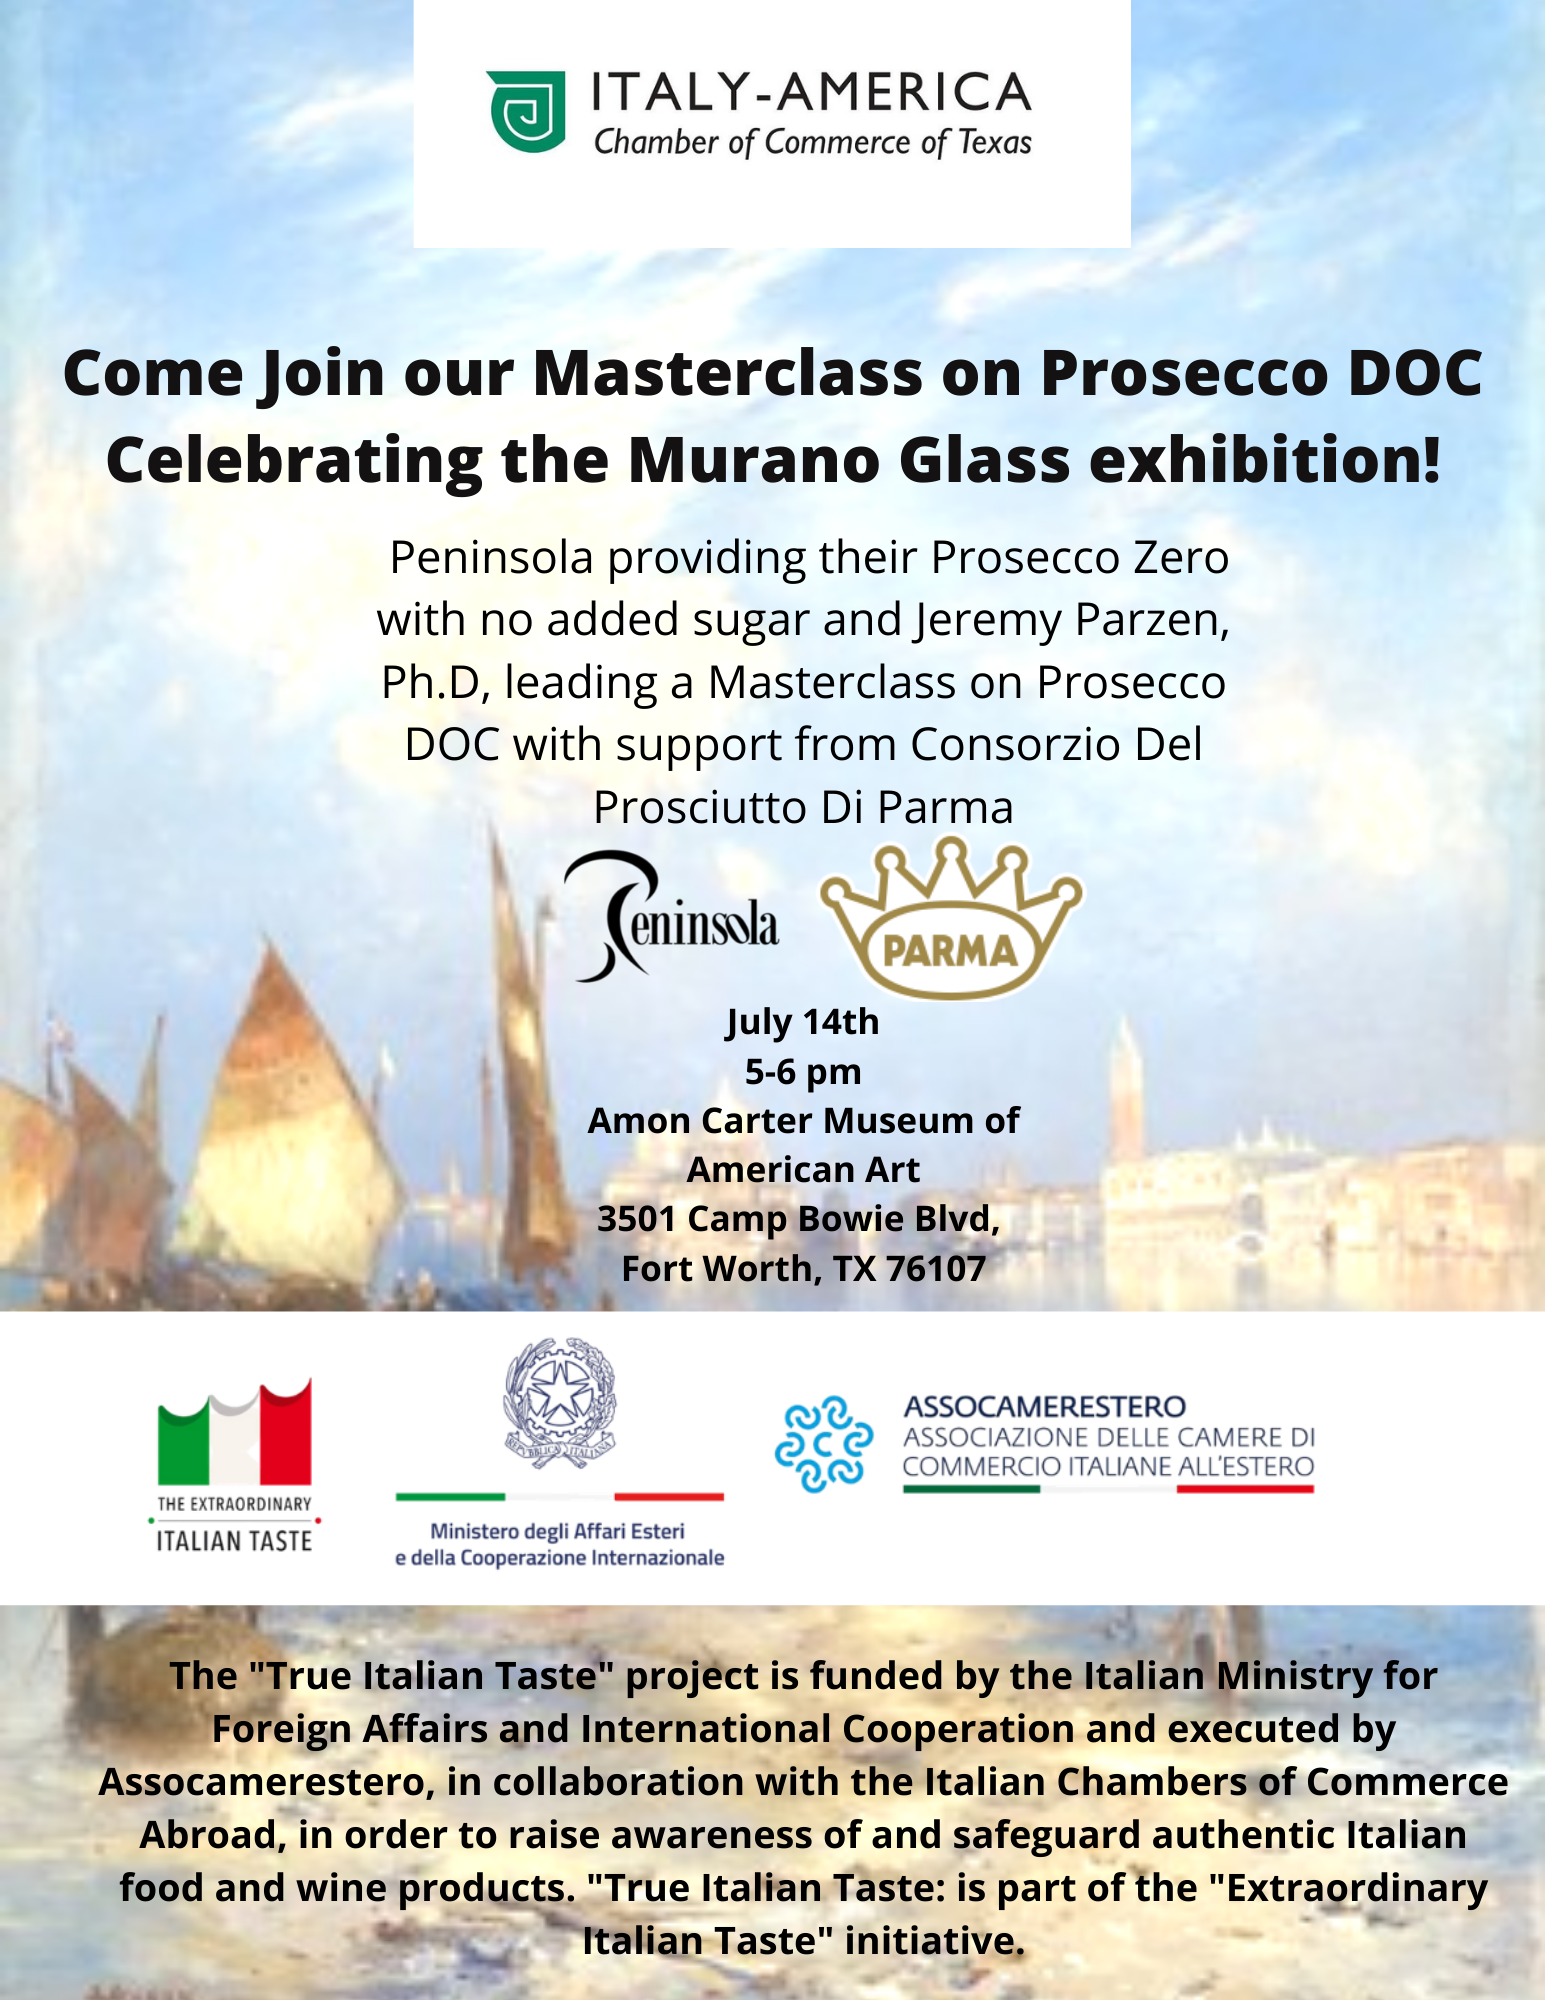 Come%20Join%20us%20in%20Celebrating%20the%20Murano%20Glass%20exhibition%20at%20the%20Amon%20Carter%20Museum%20of%20American%20Art%20on%20the%2014th%20of%20July%20_1_.png